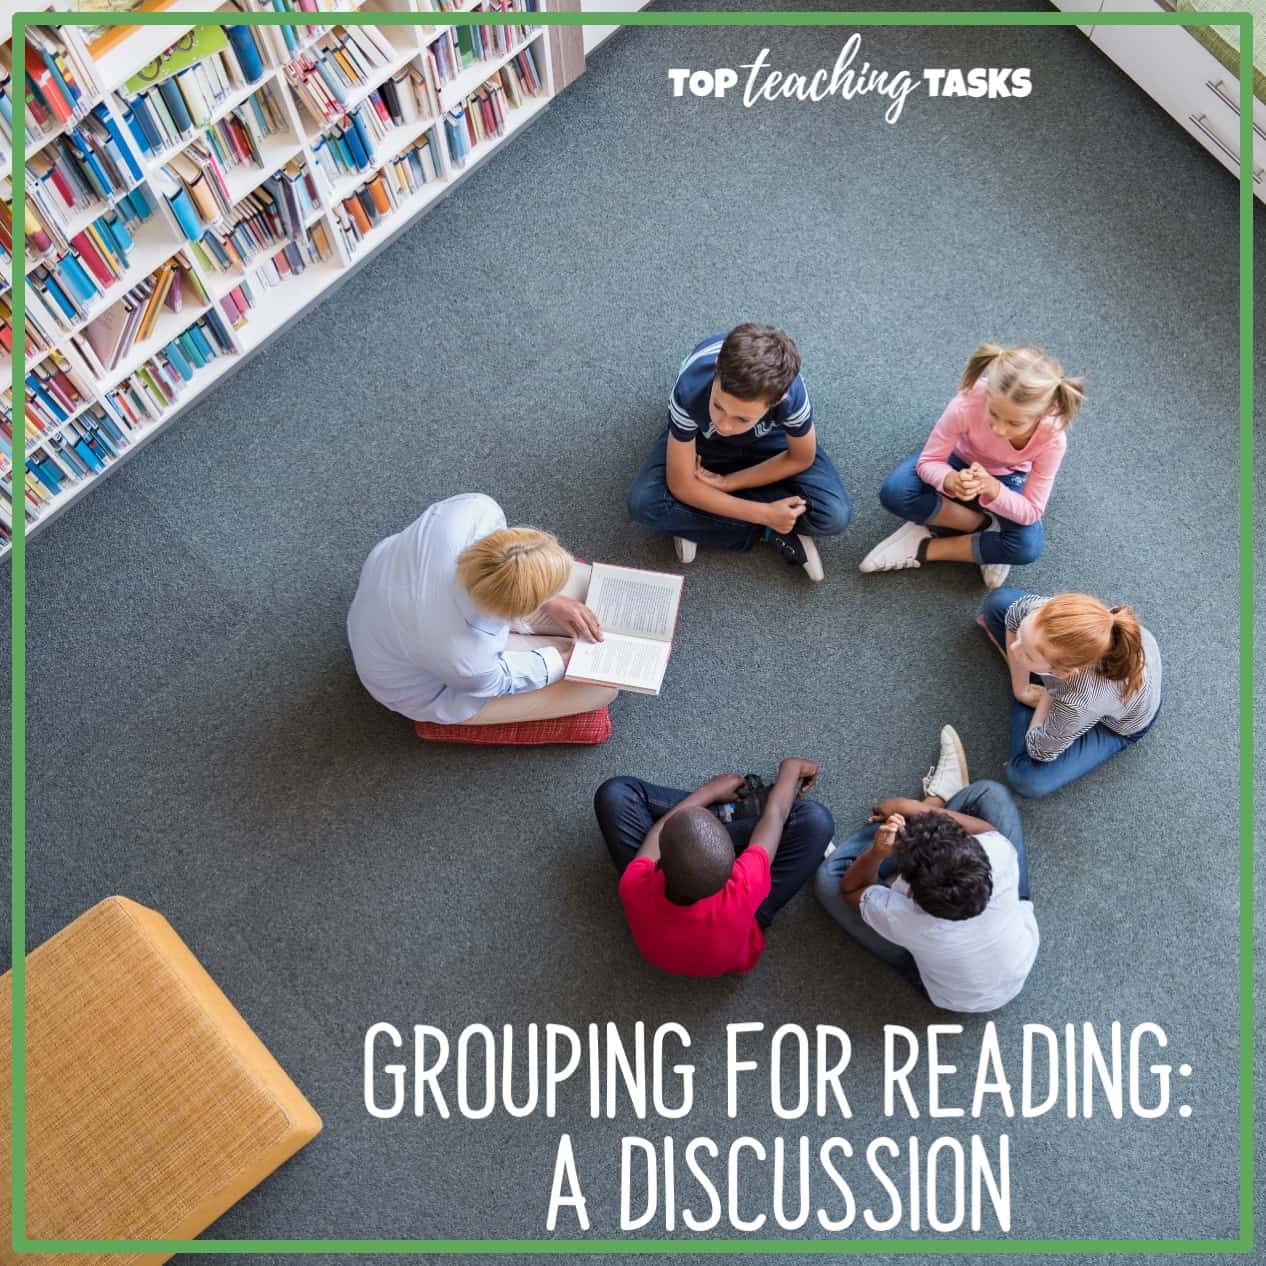 Grouping for reading - a discussion